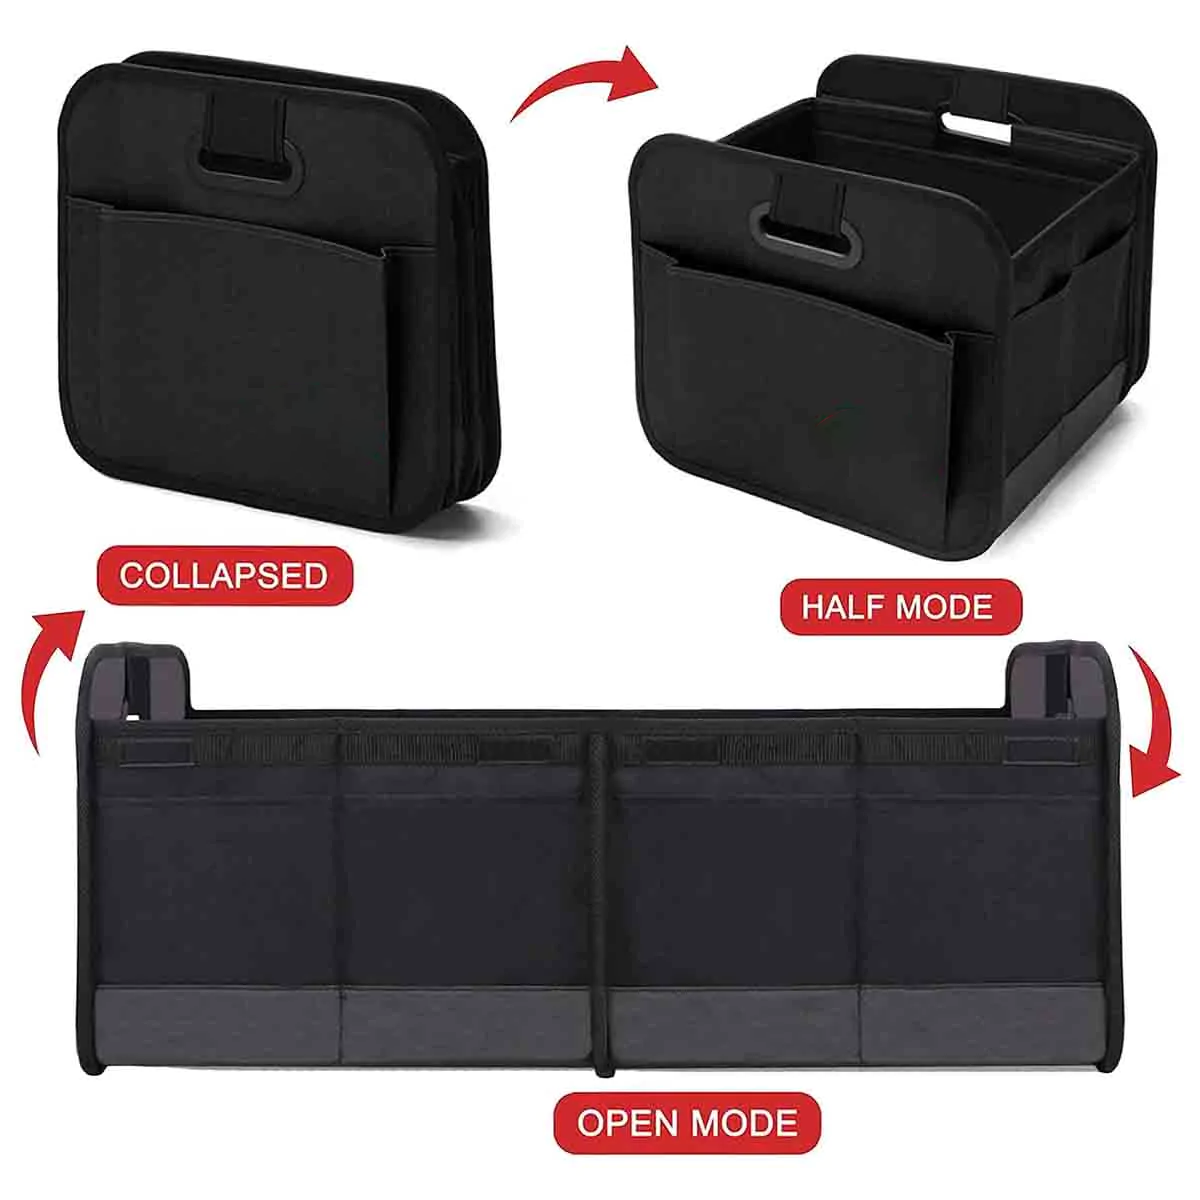 Custom Text For Car Trunk Organizer Storage, Compatible with All Cars, Reinforced Handles, Collapsible Multi, Compartment Car Organizers, Foldable and Waterproof, 600D Oxford Polyester UE12995